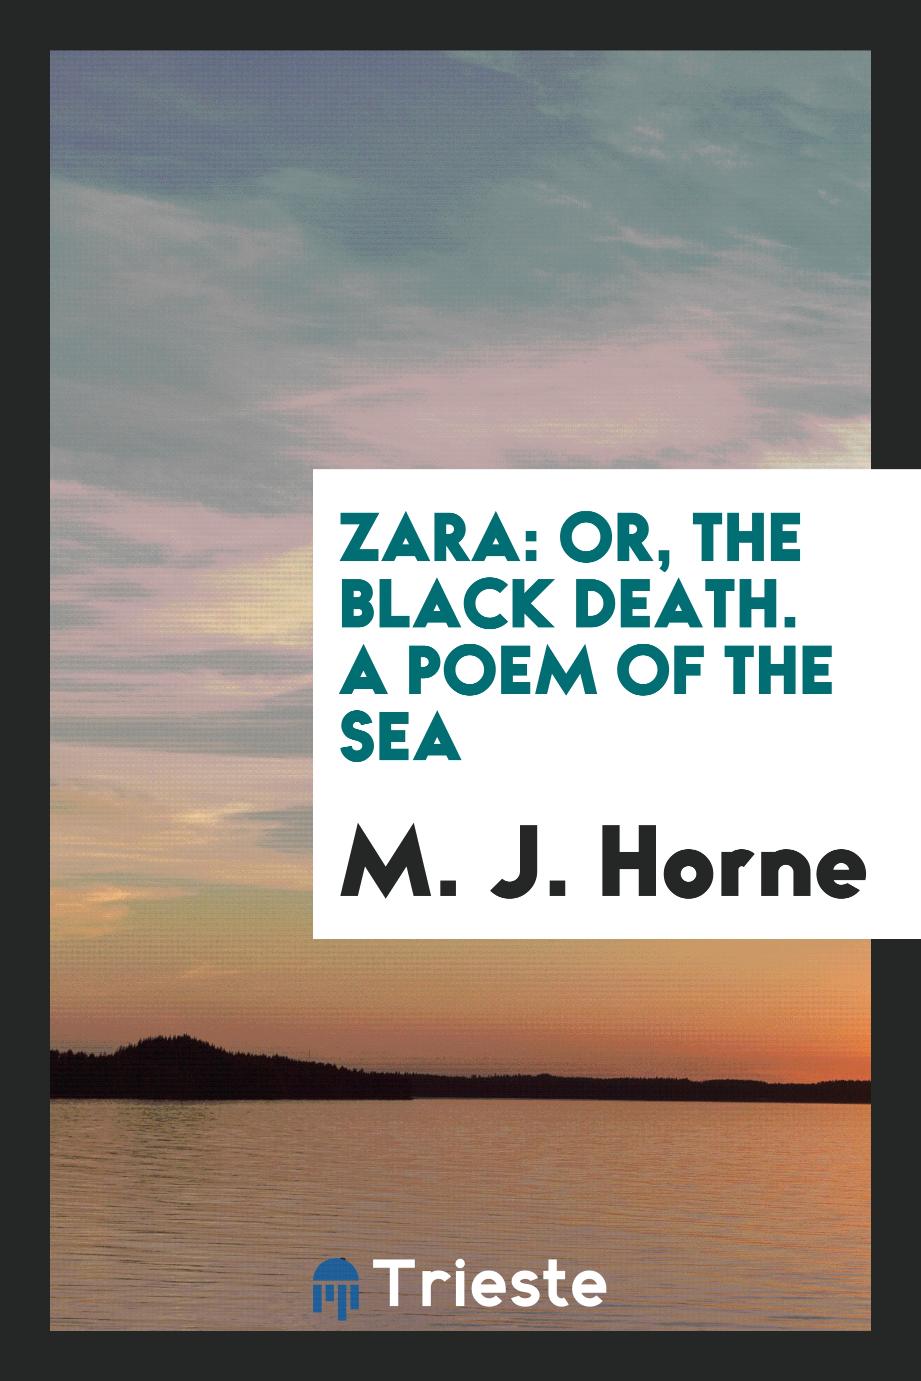 Zara: or, The black death. A poem of the sea